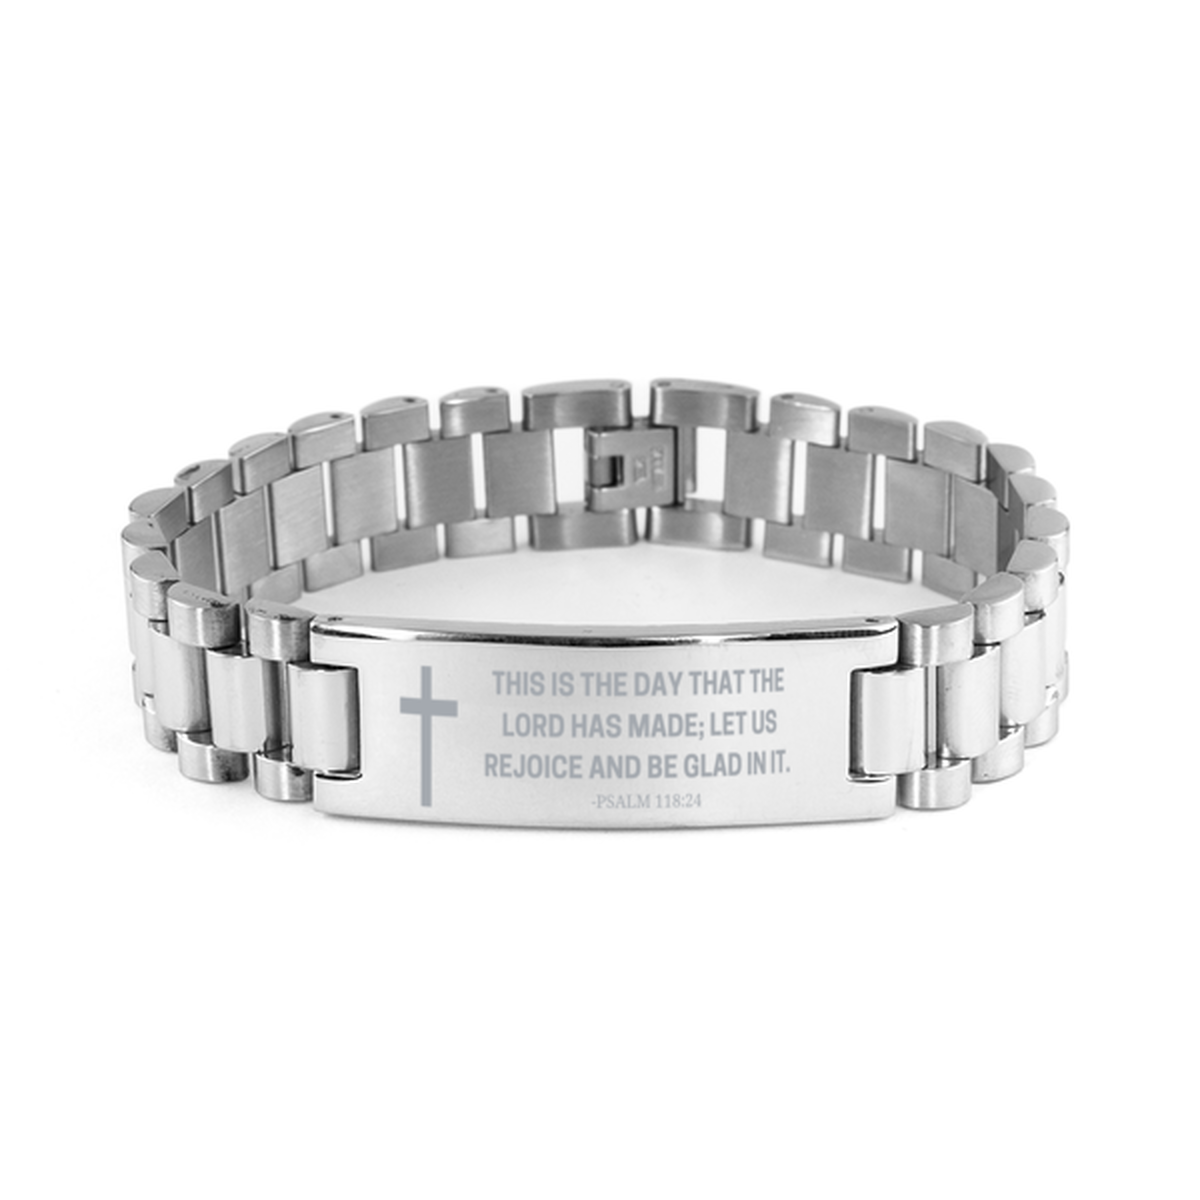 Baptism Gifts For Teenage Boys Girls, Christian Bible Verse Ladder Stainless Steel Bracelet, This is the day that the lord has made, Catholic Confirmation Gifts for Son, Godson, Grandson, Nephew